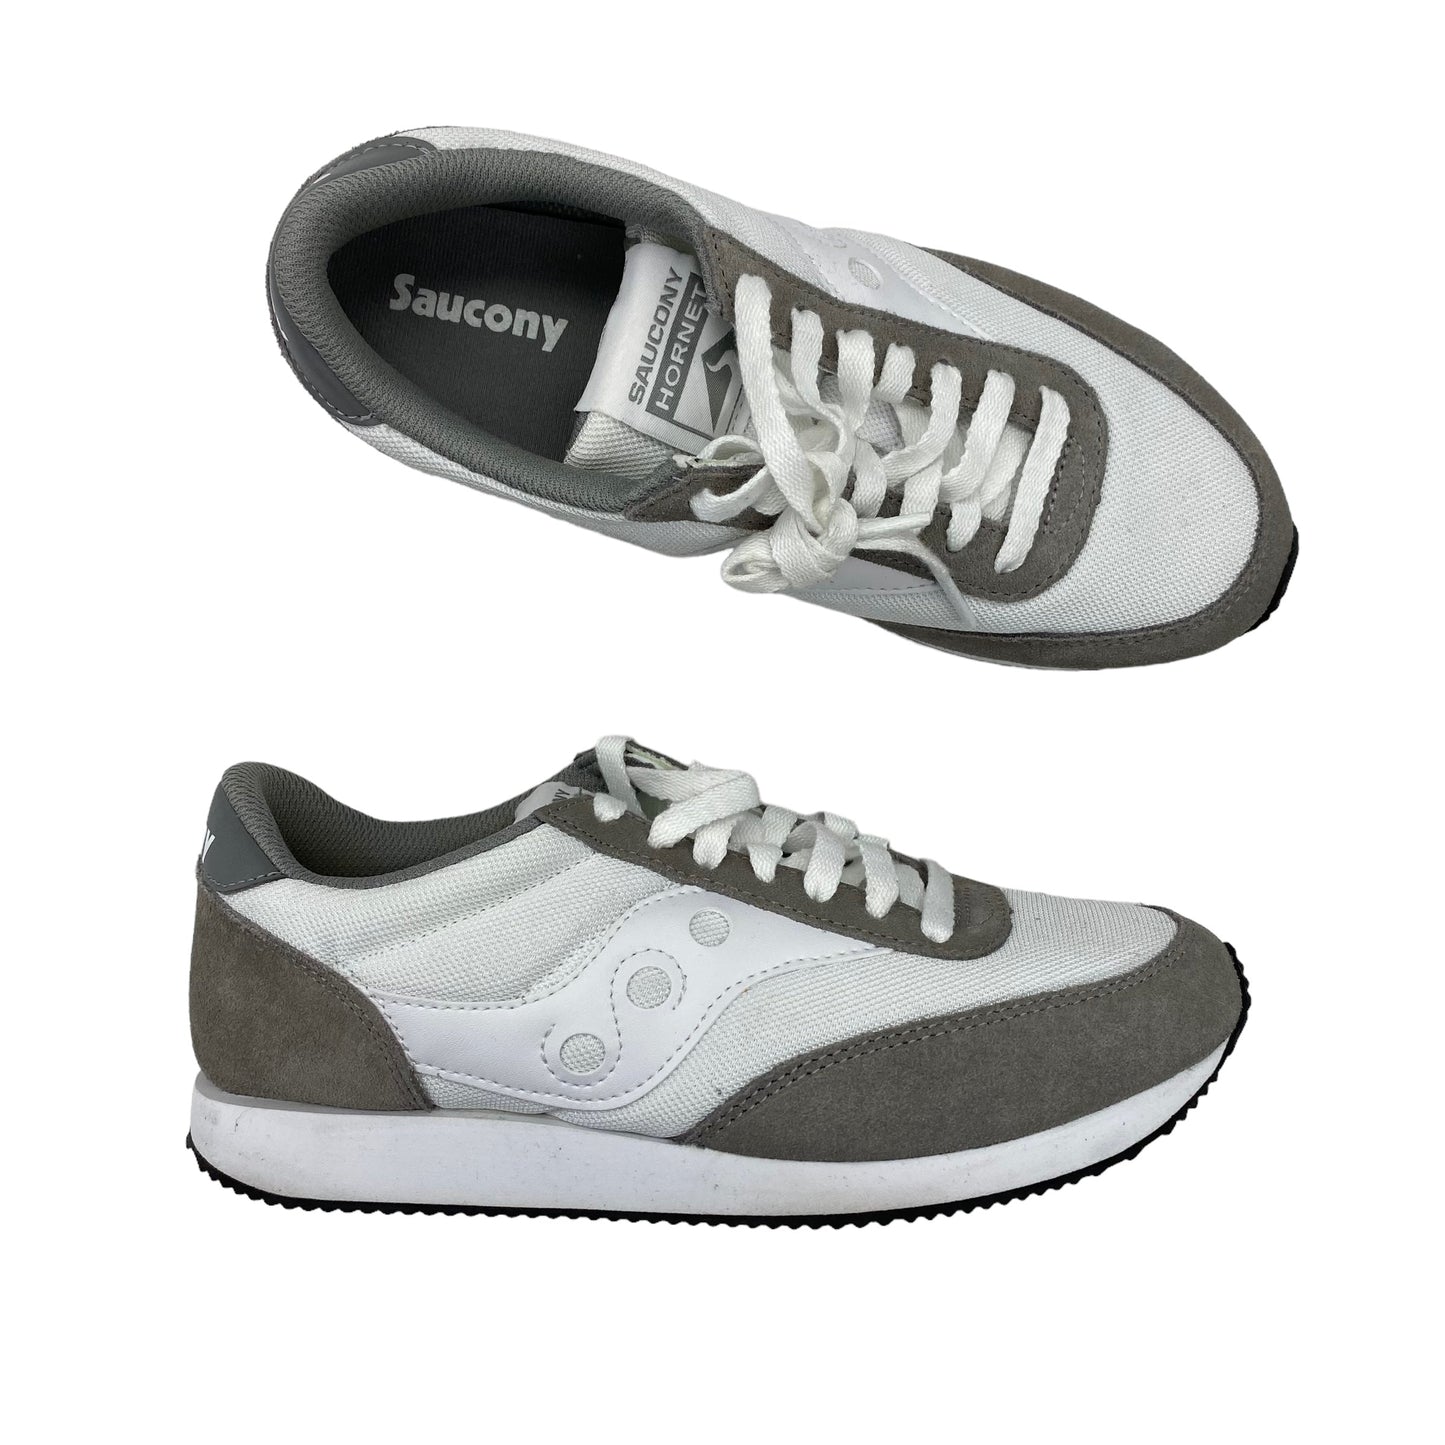 Shoes Sneakers By Saucony  Size: 6.5